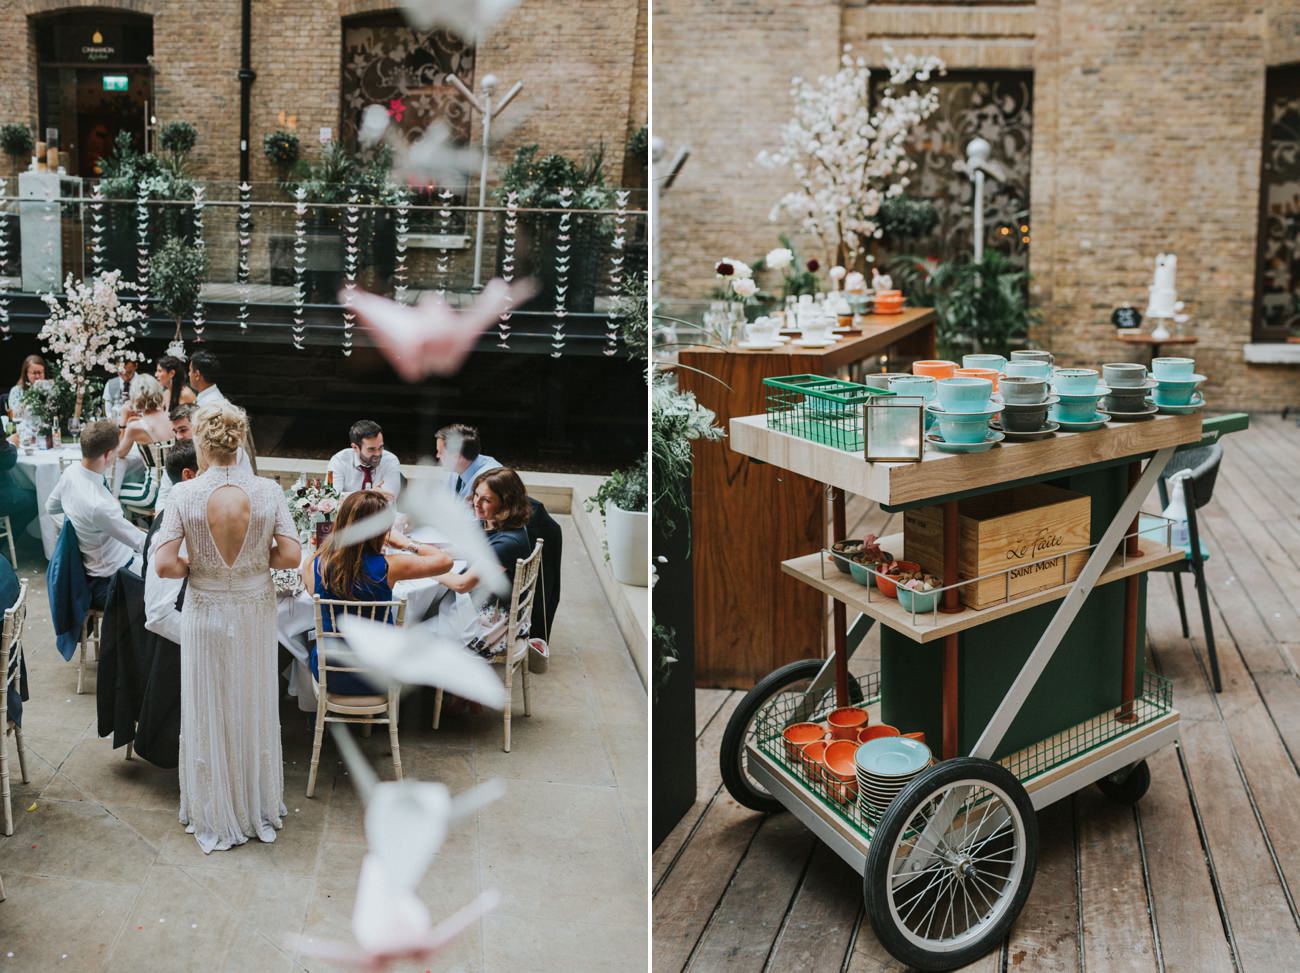 Coffee station trolly and guest at a wedding in London at Devonshire Terrace.